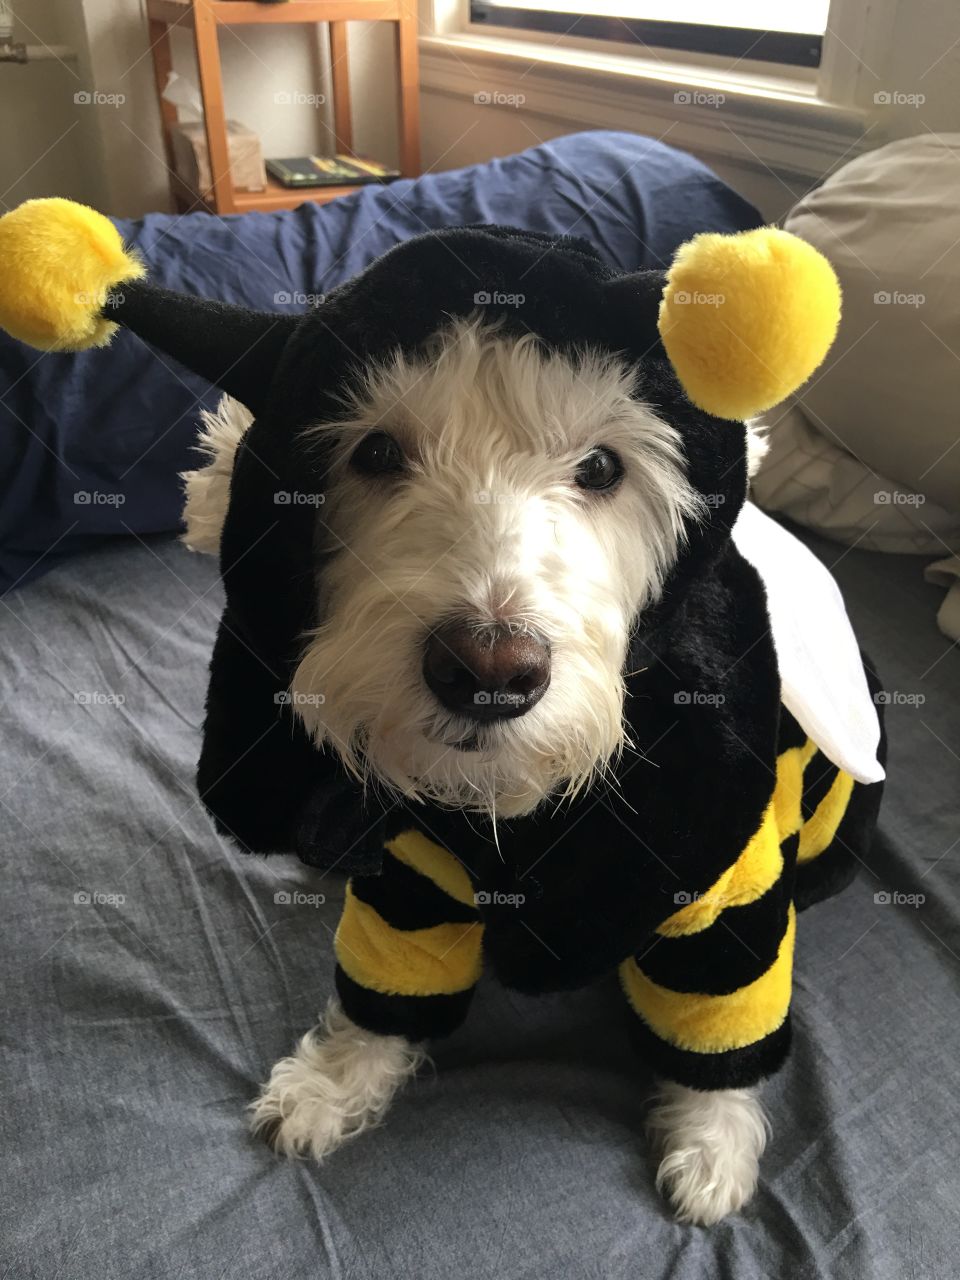 my own bumblebee